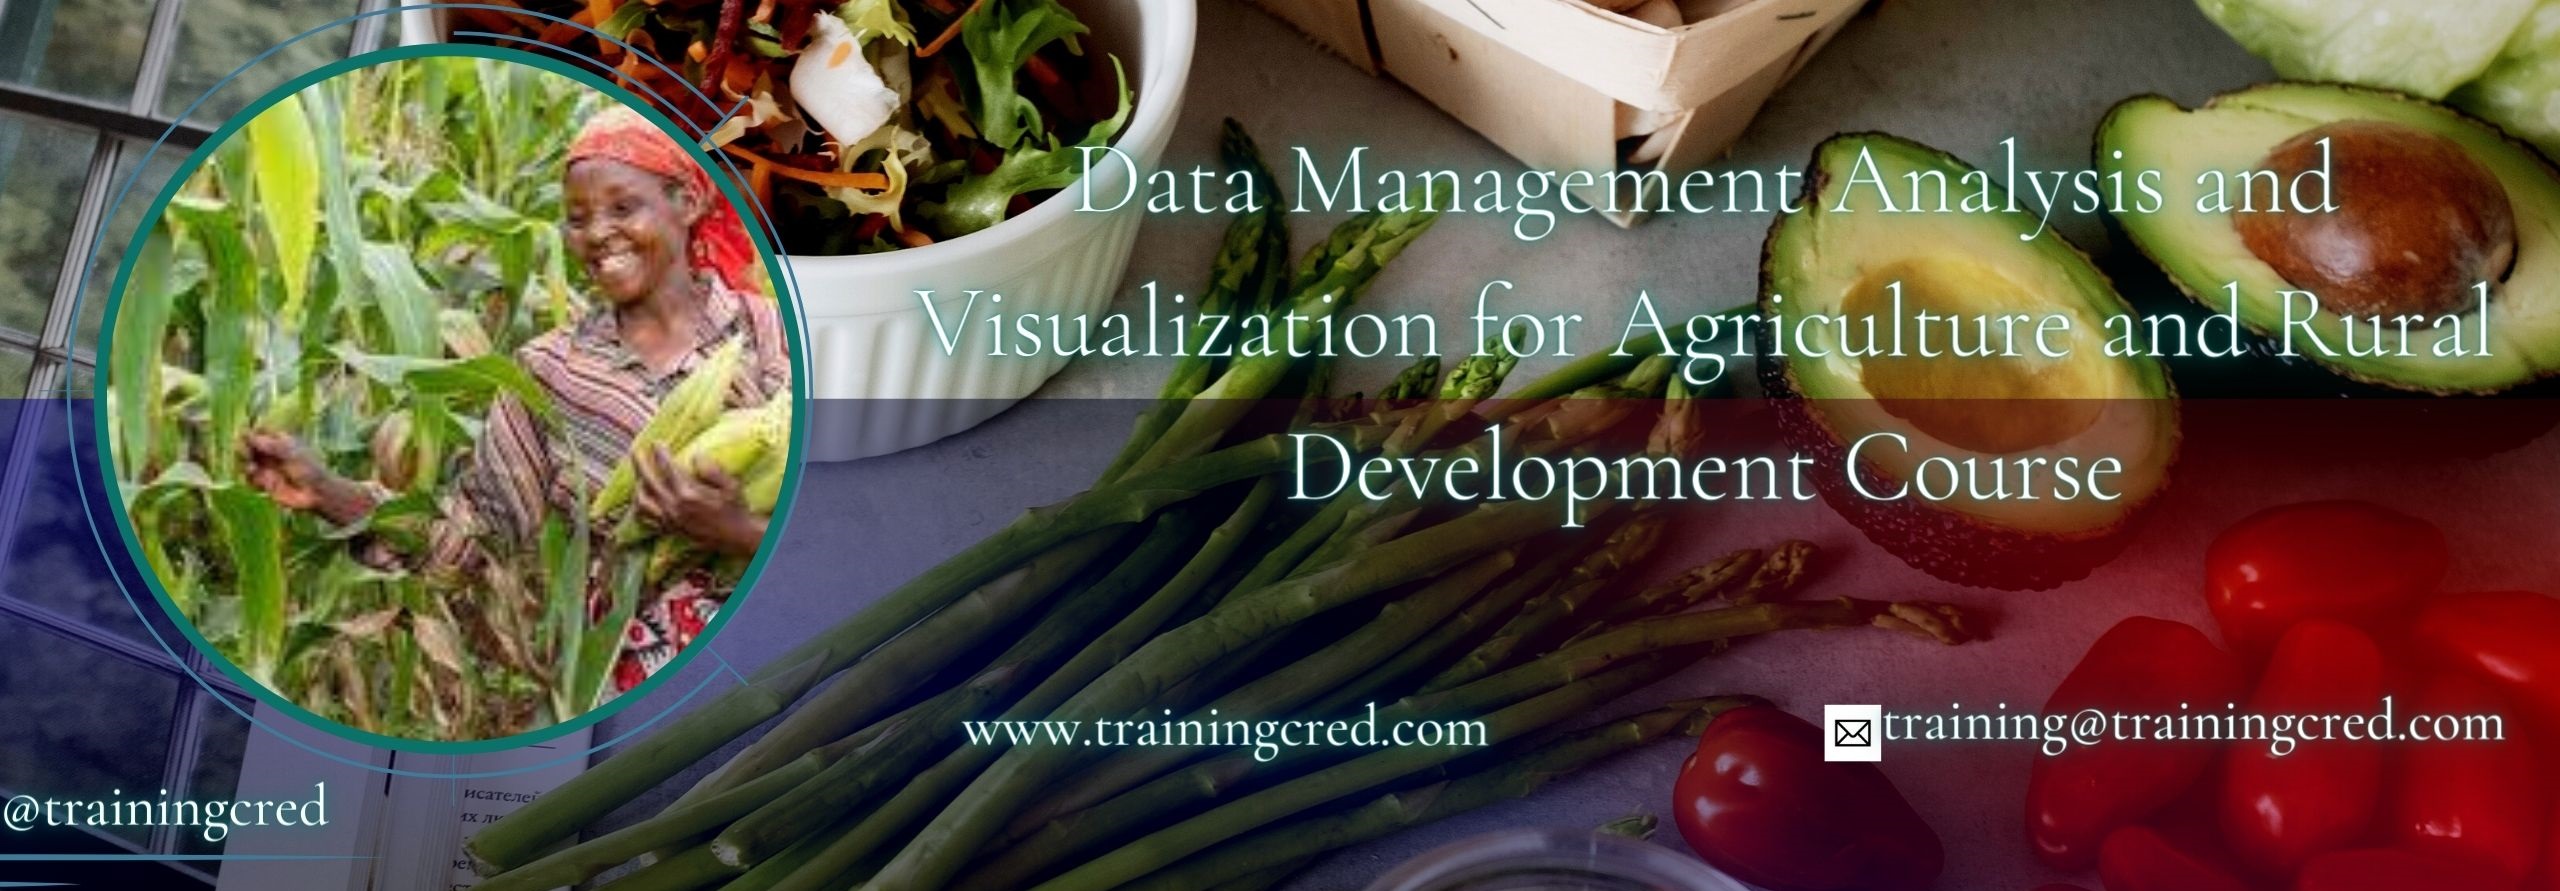 Data Management, Analysis and Visualization for Agriculture and Rural Development